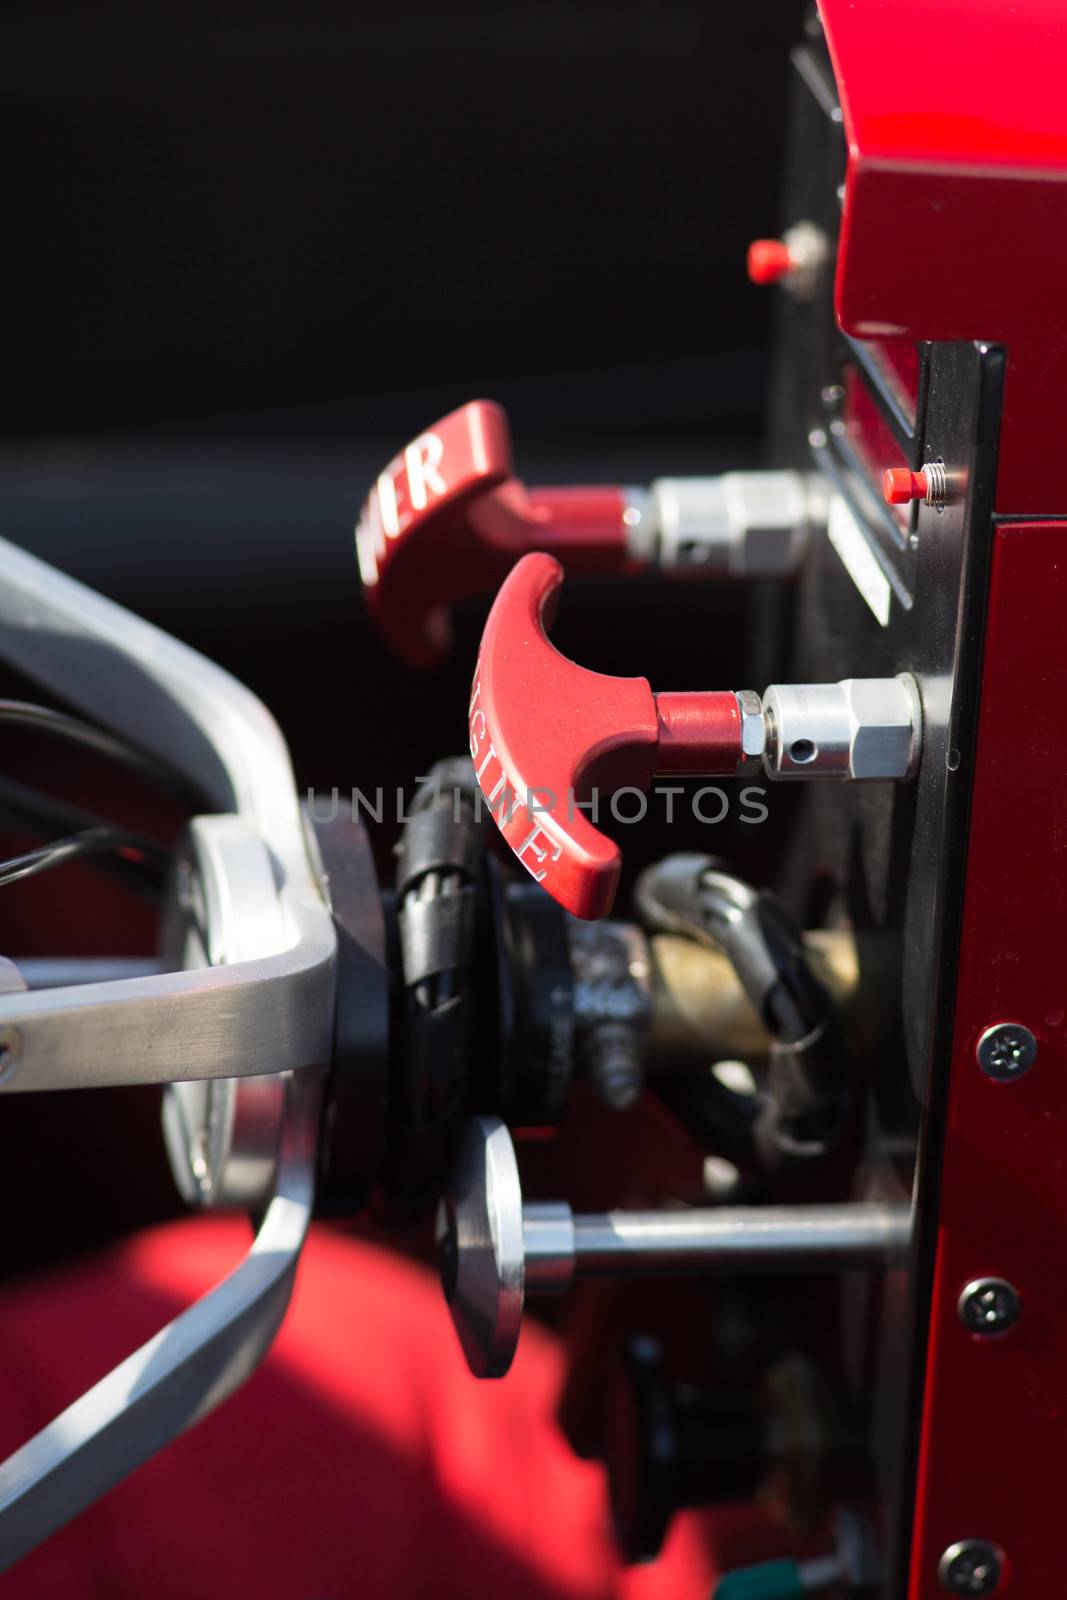 Hot Rod, detail of the control panel by watchtheworld